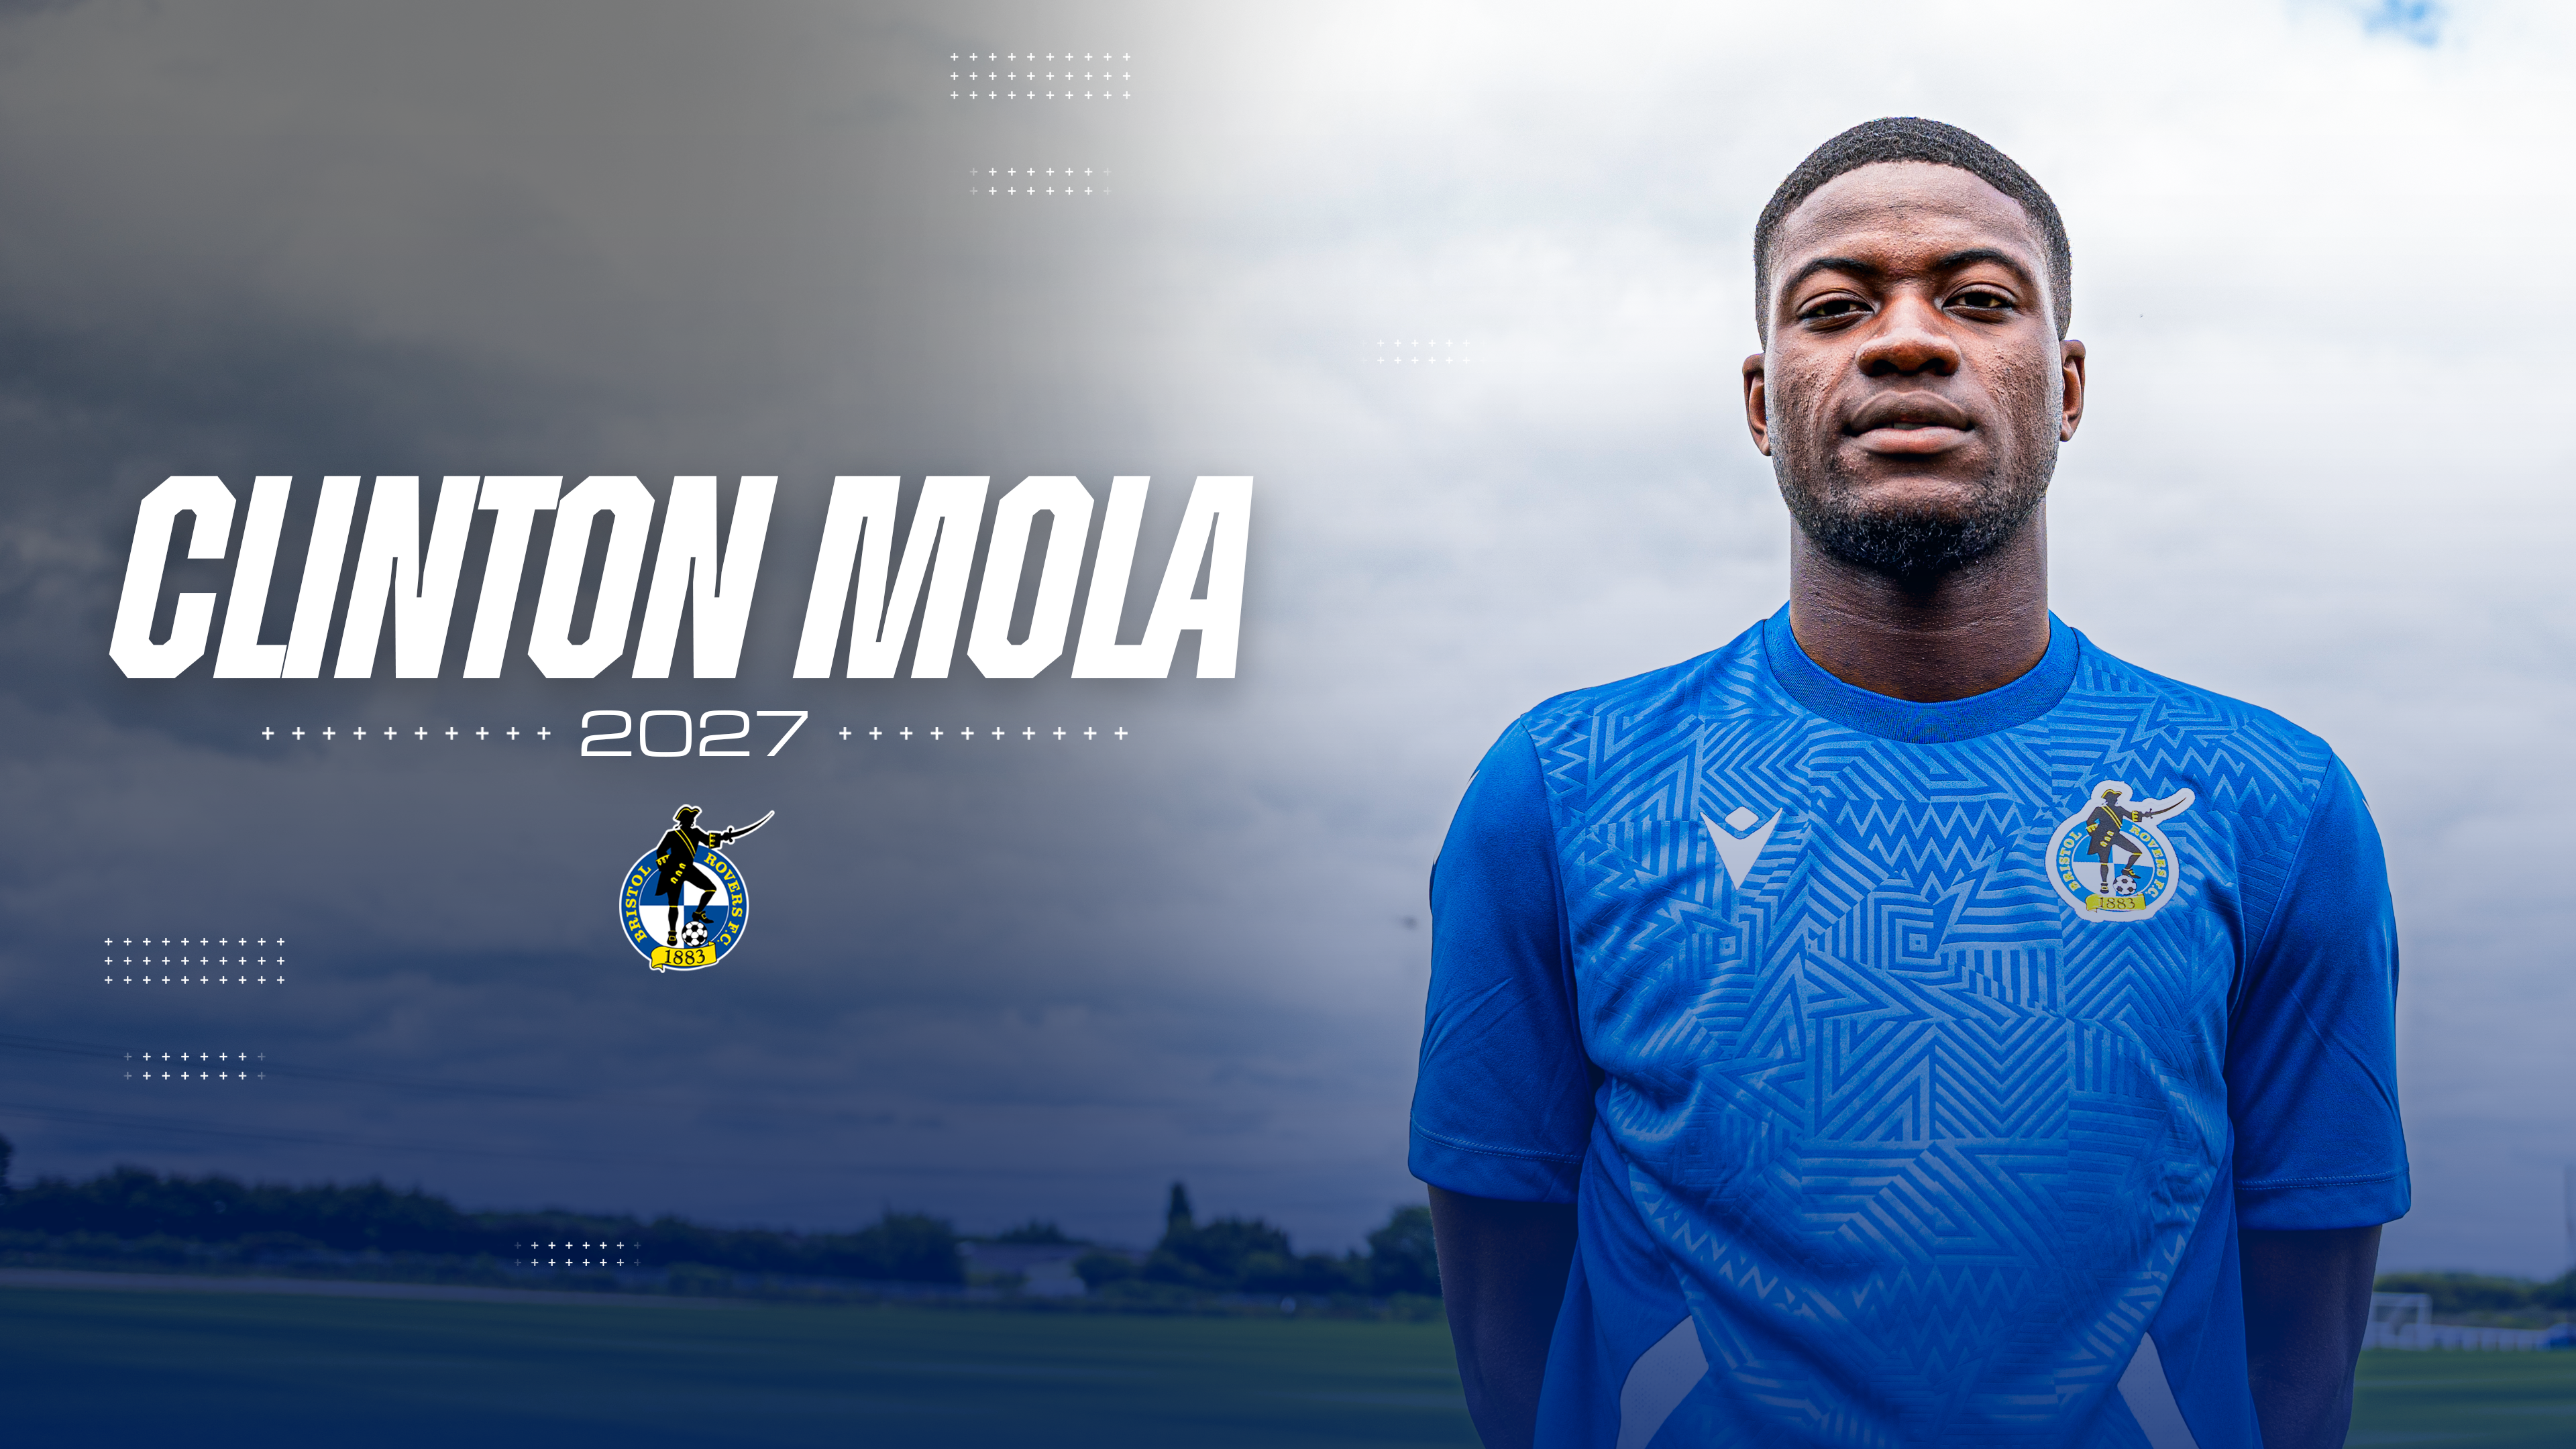 Clinton Mola signs for Bristol Rovers